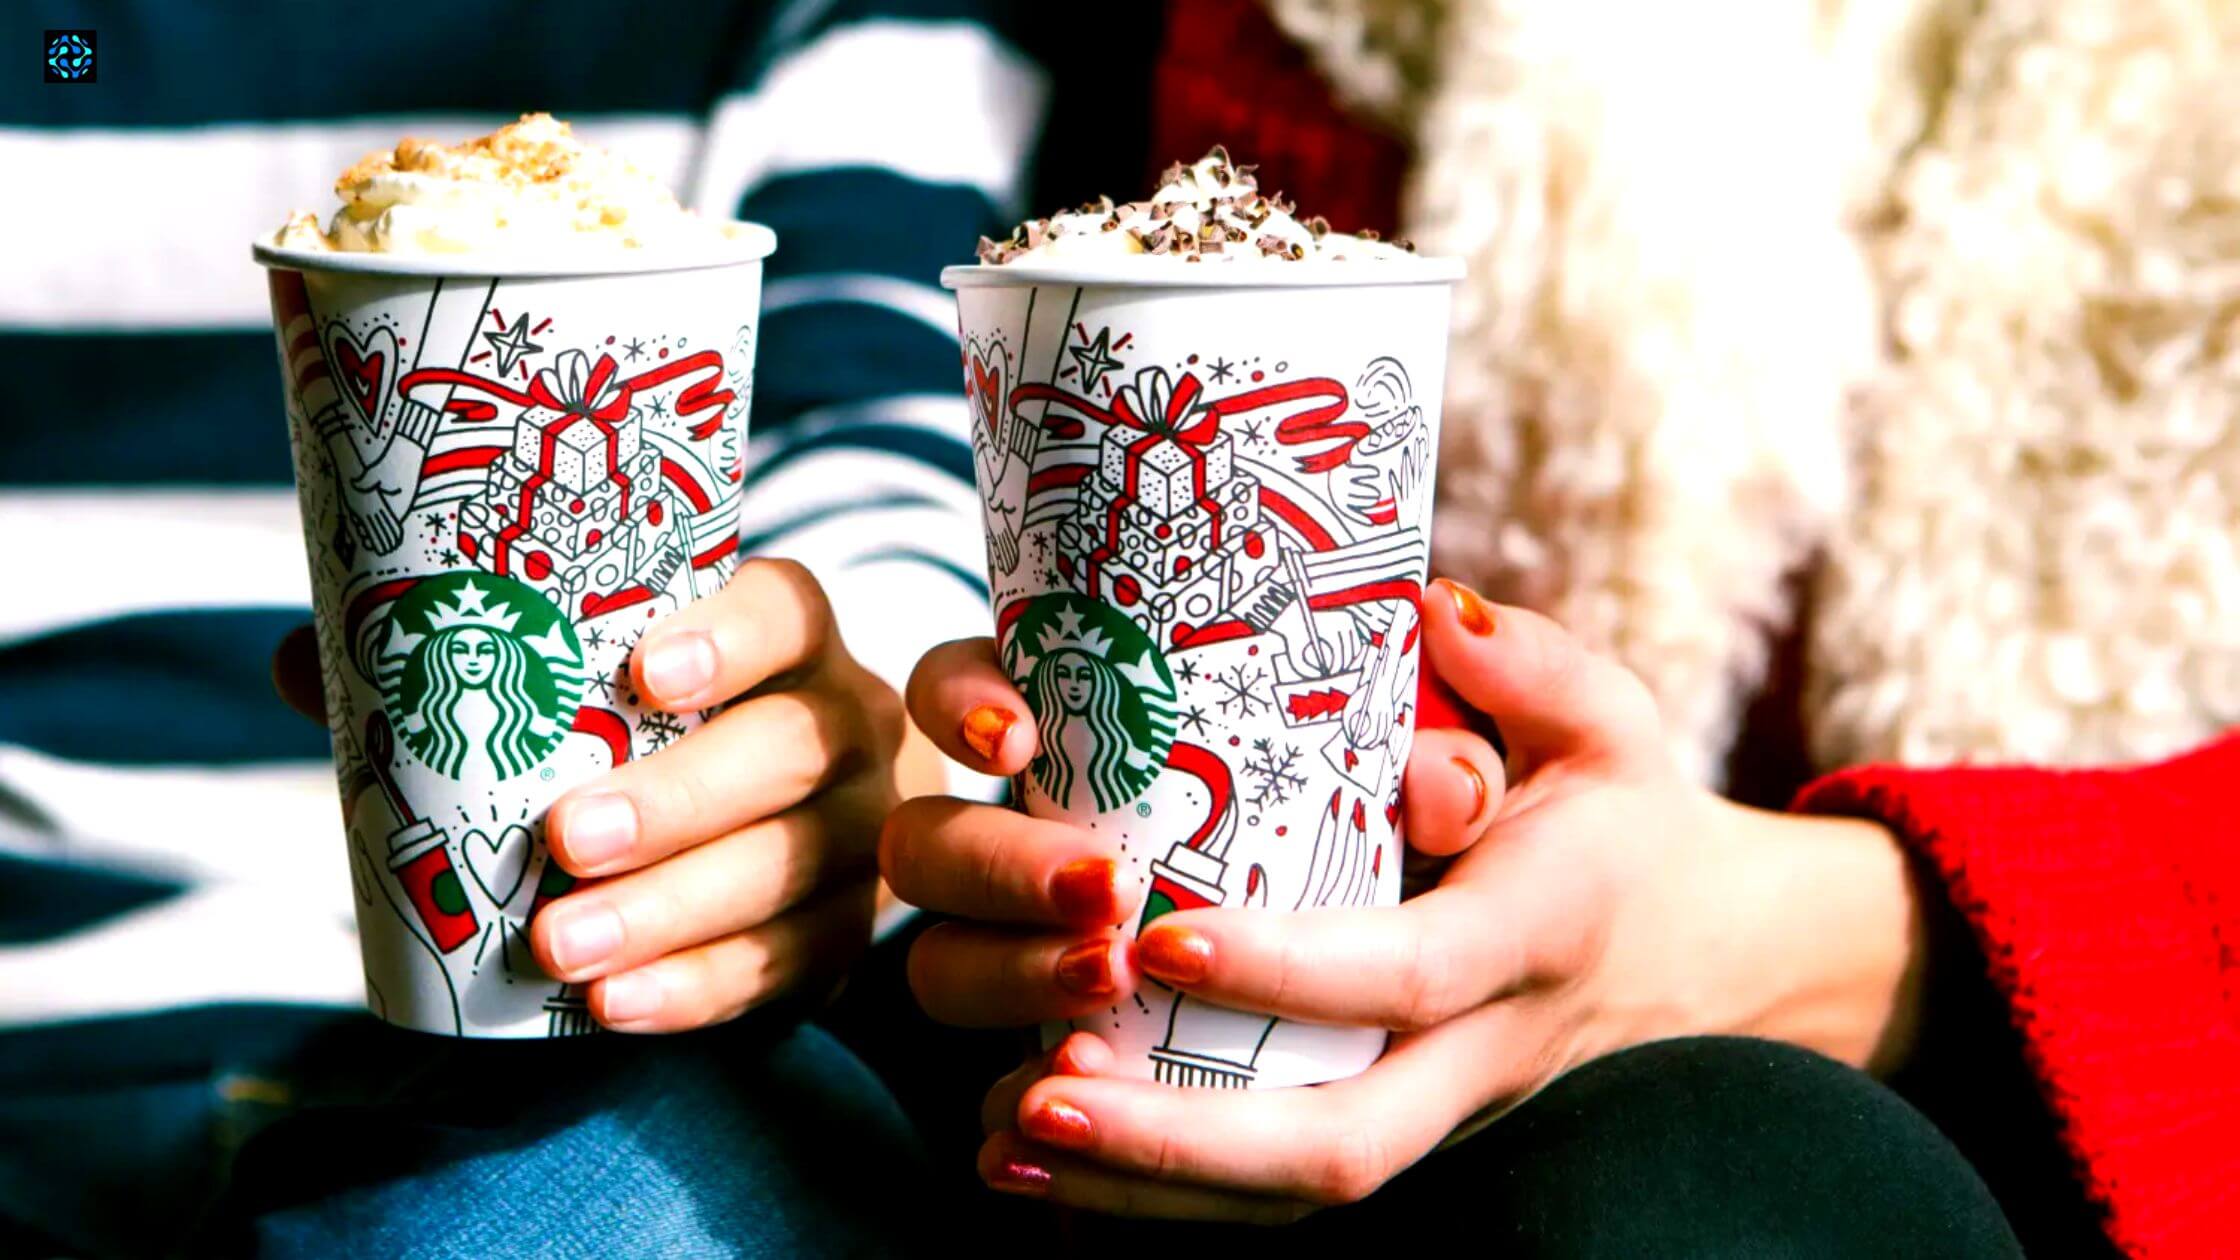 Starbucks To Launch Their Exciting Holiday Menu This Week